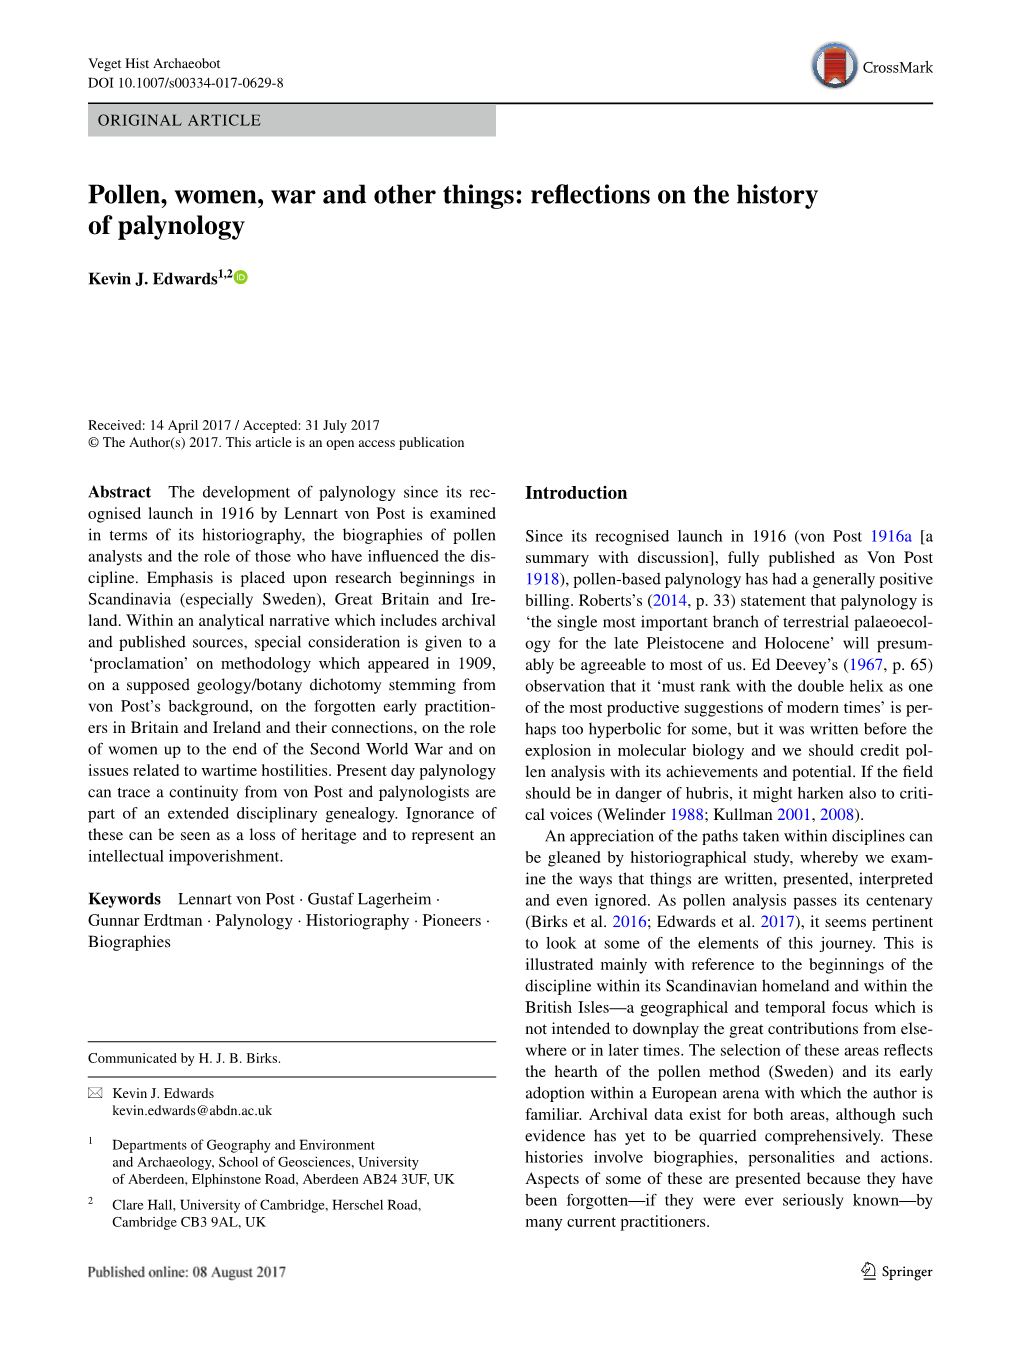 Pollen, Women, War and Other Things: Reflections on the History of Palynology